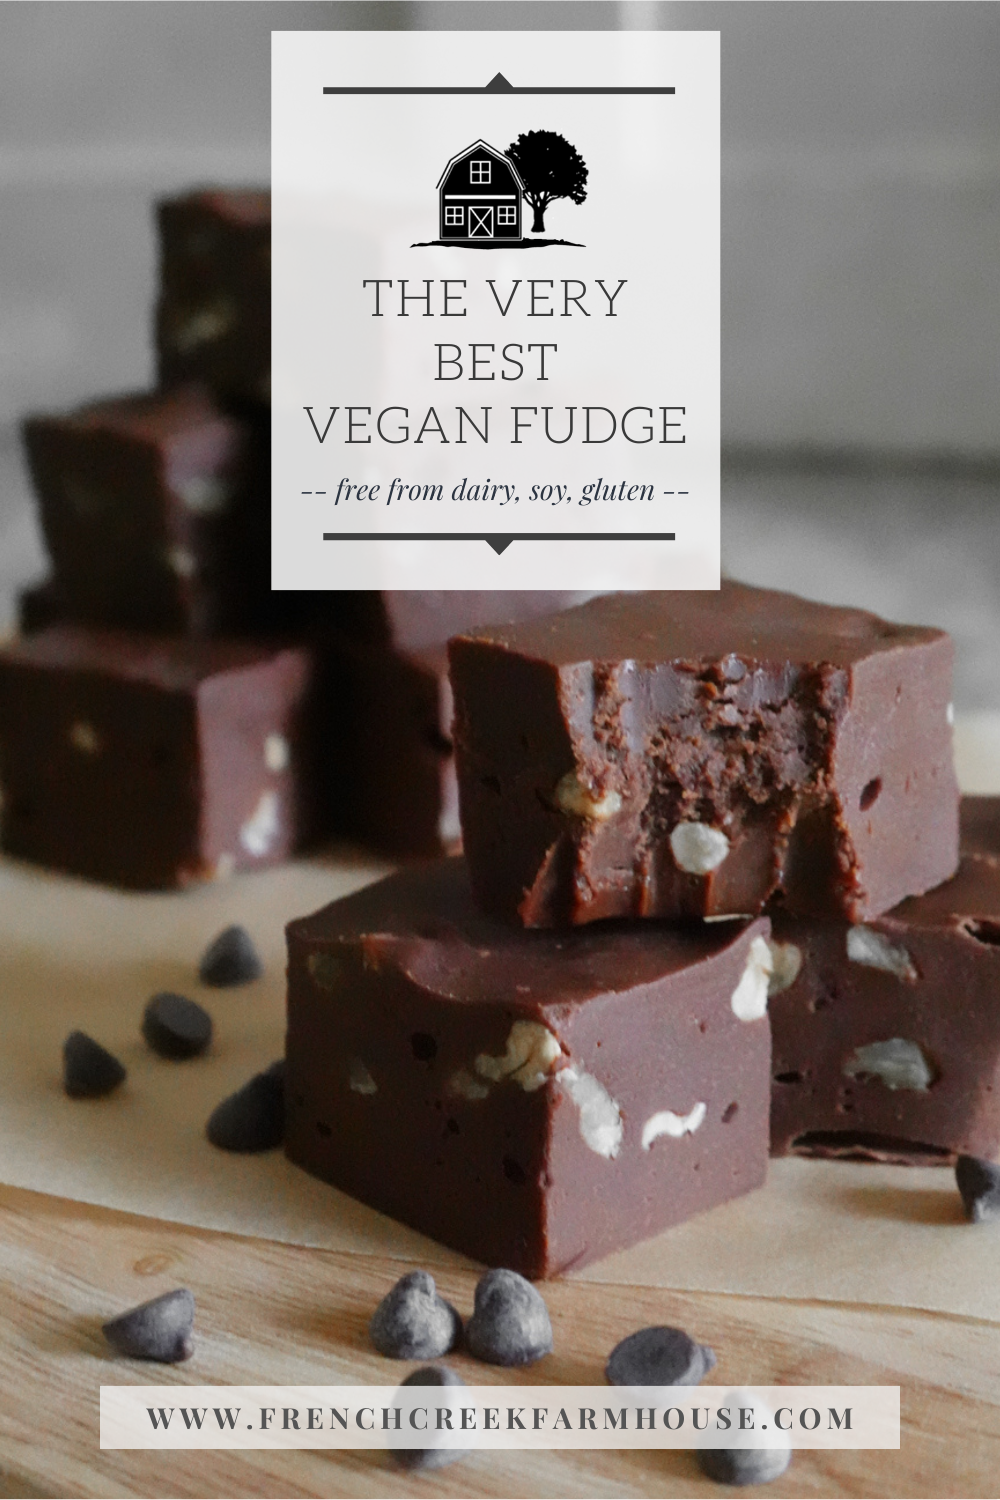 The very best vegan fudge recipe - Pin to find it later!